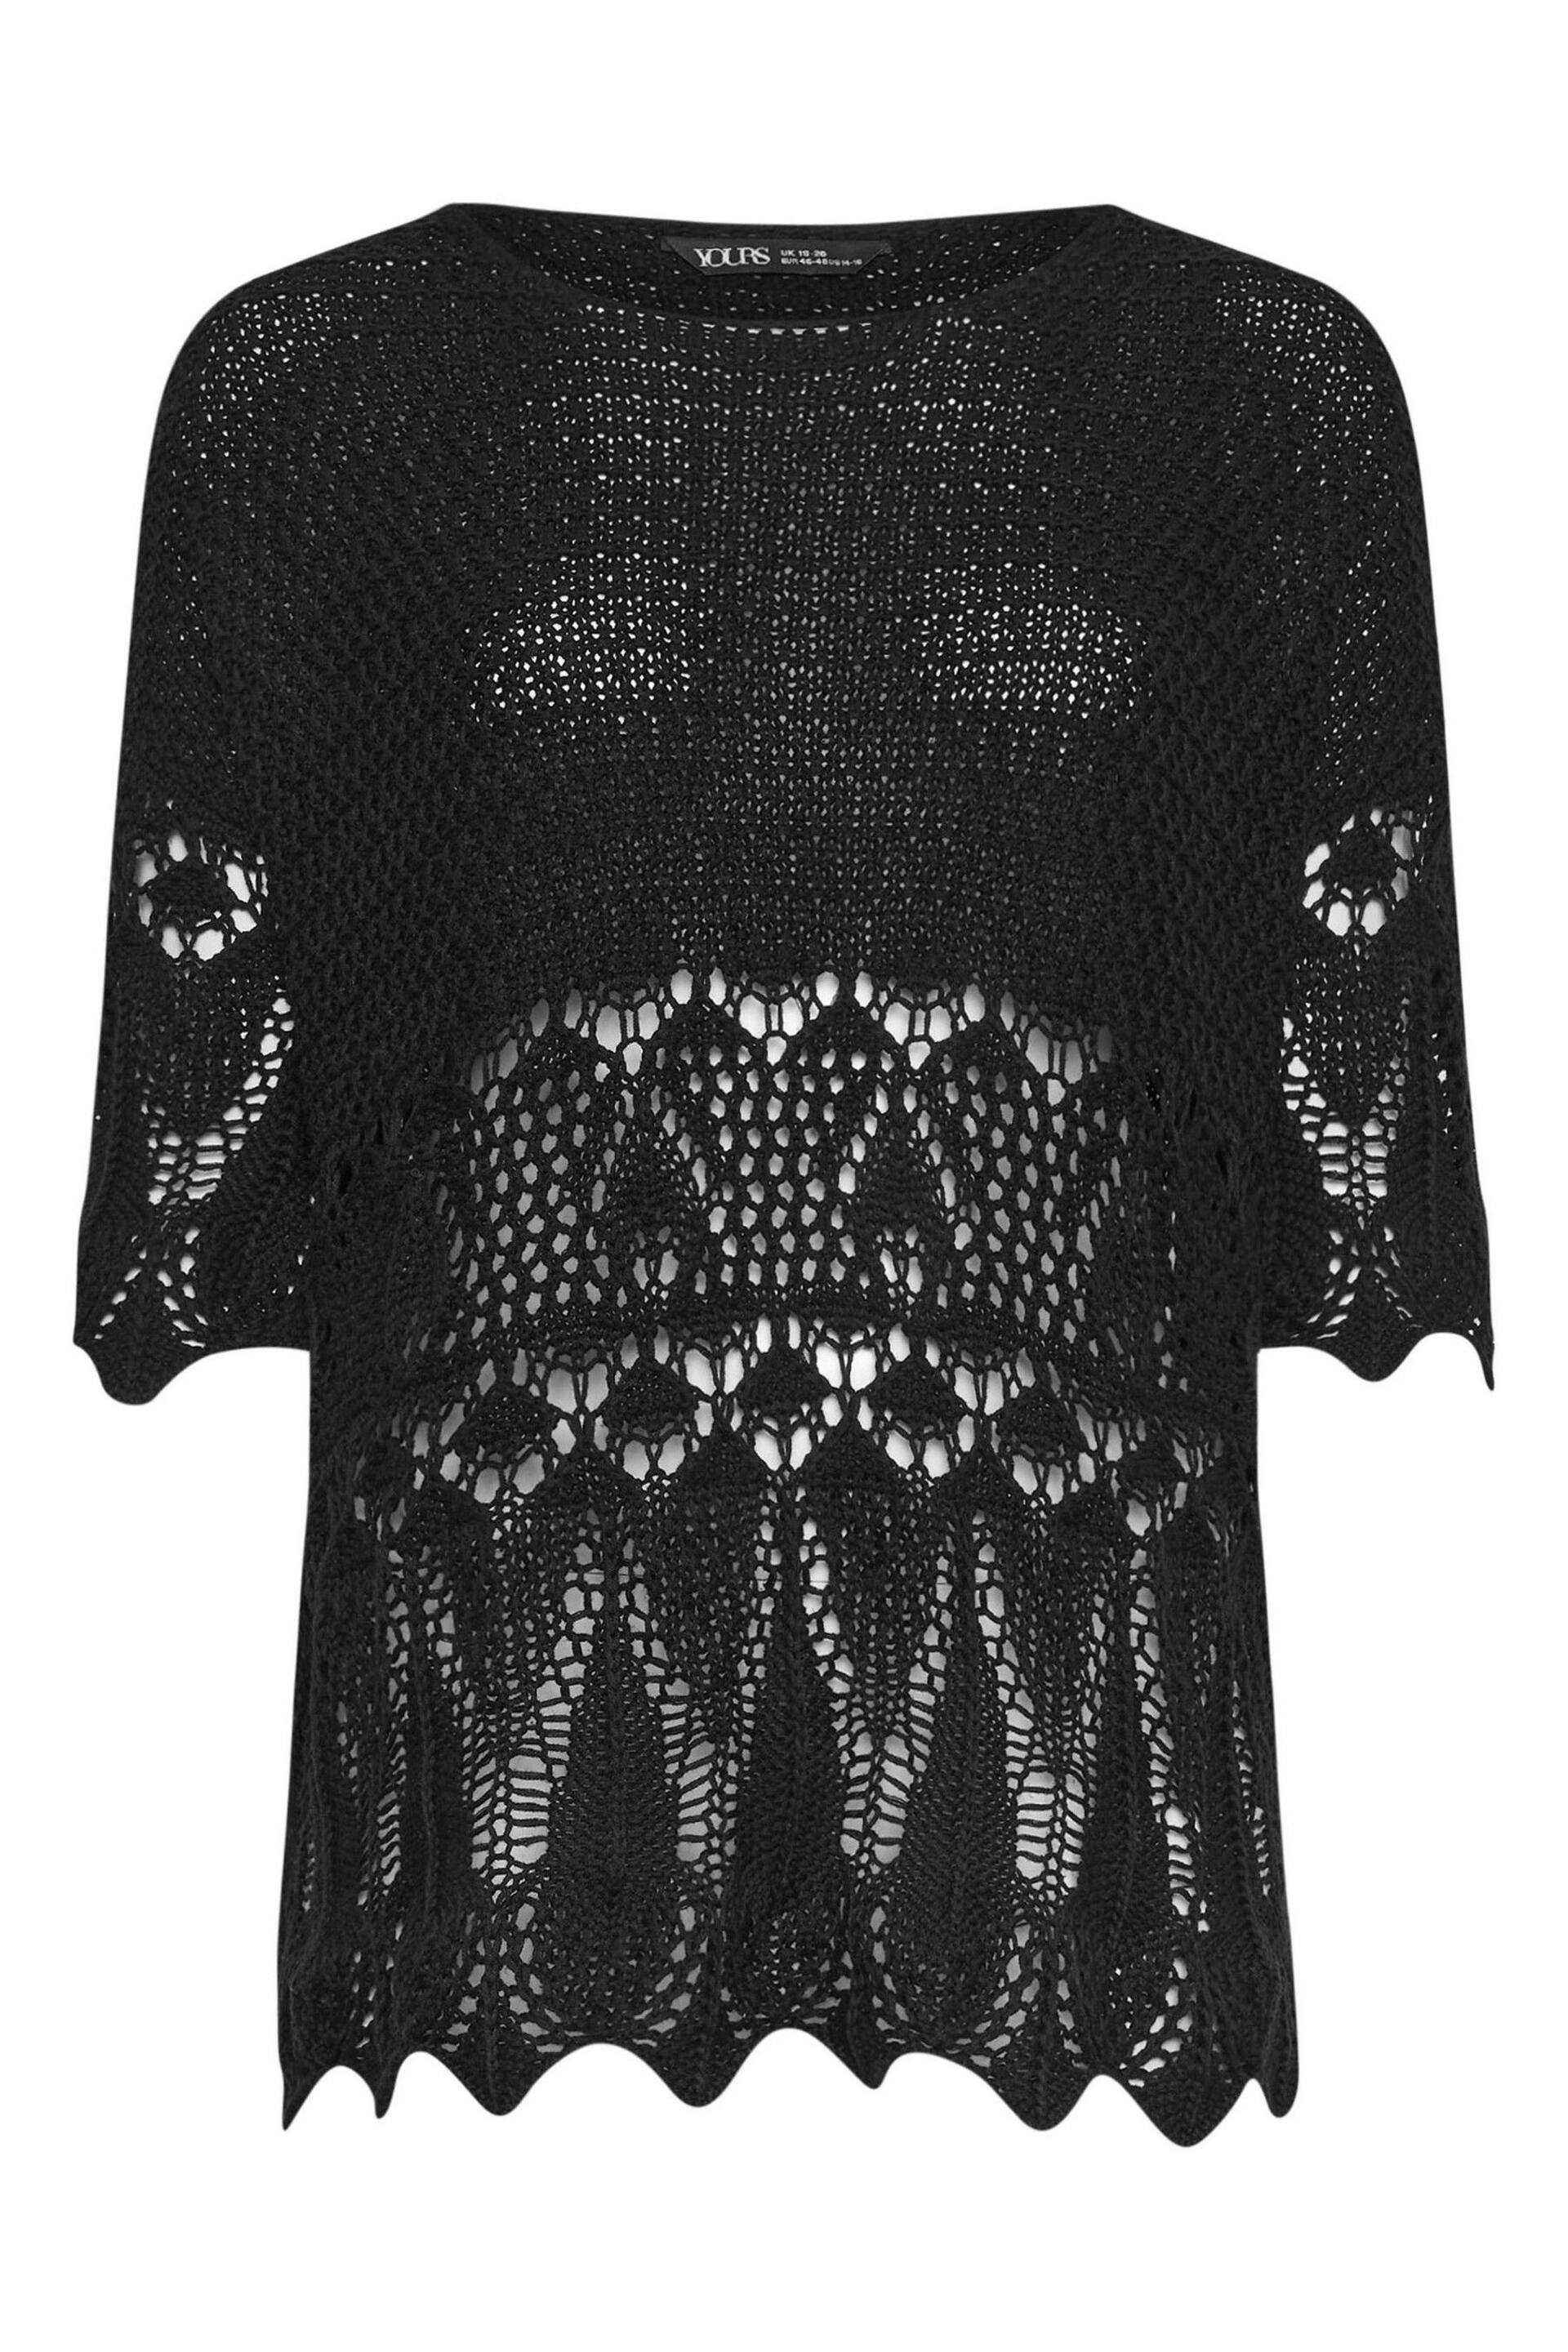 Yours Curve Black Ivory White Crochet Detail Jumper - Image 5 of 5